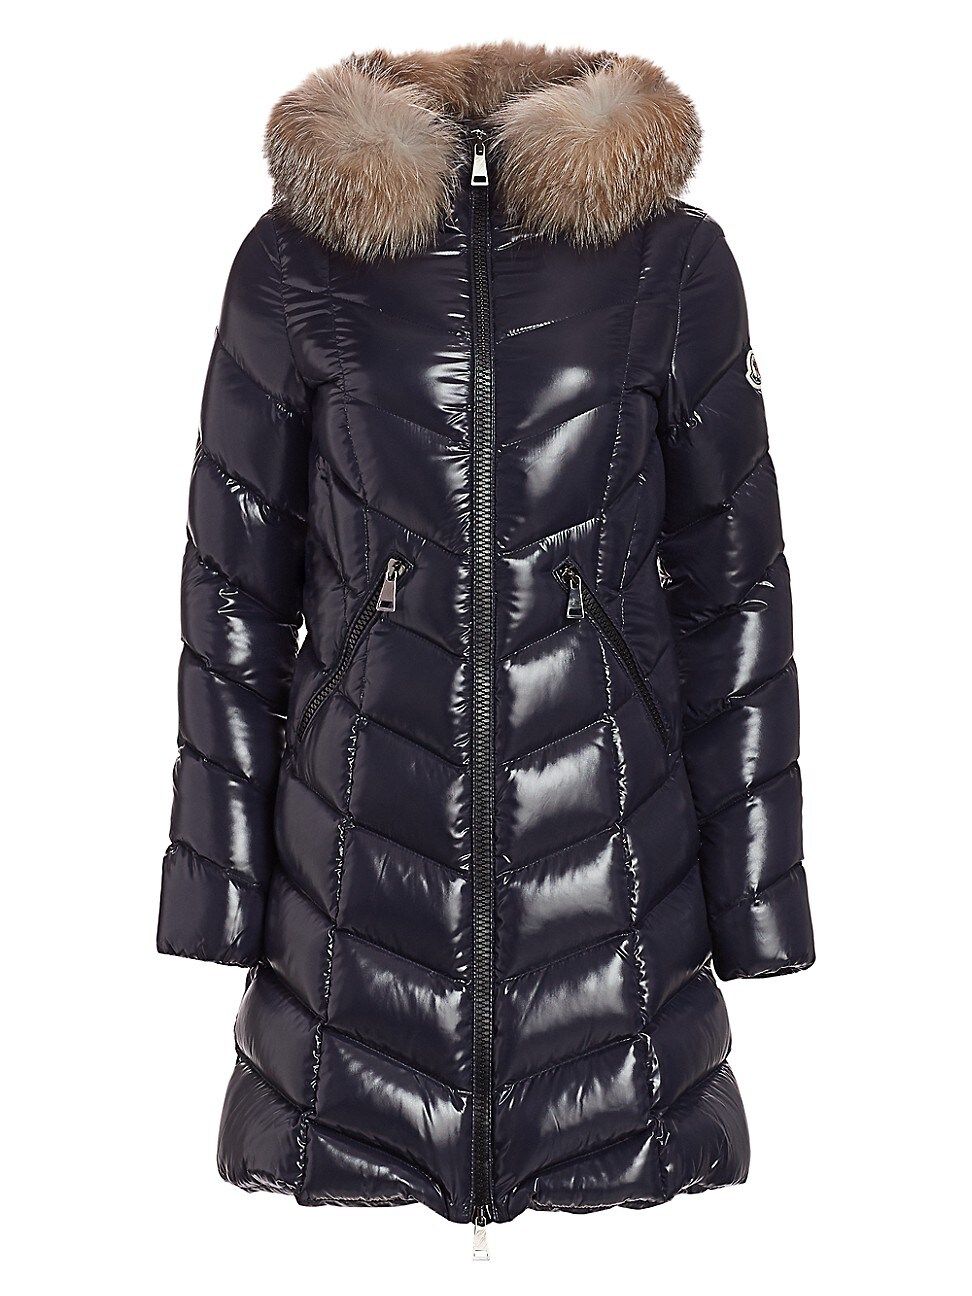 Moncler Women's Fulmarus Fox Fur-Trim Lacquer Puffer Coat - Navy - Size Small | Saks Fifth Avenue